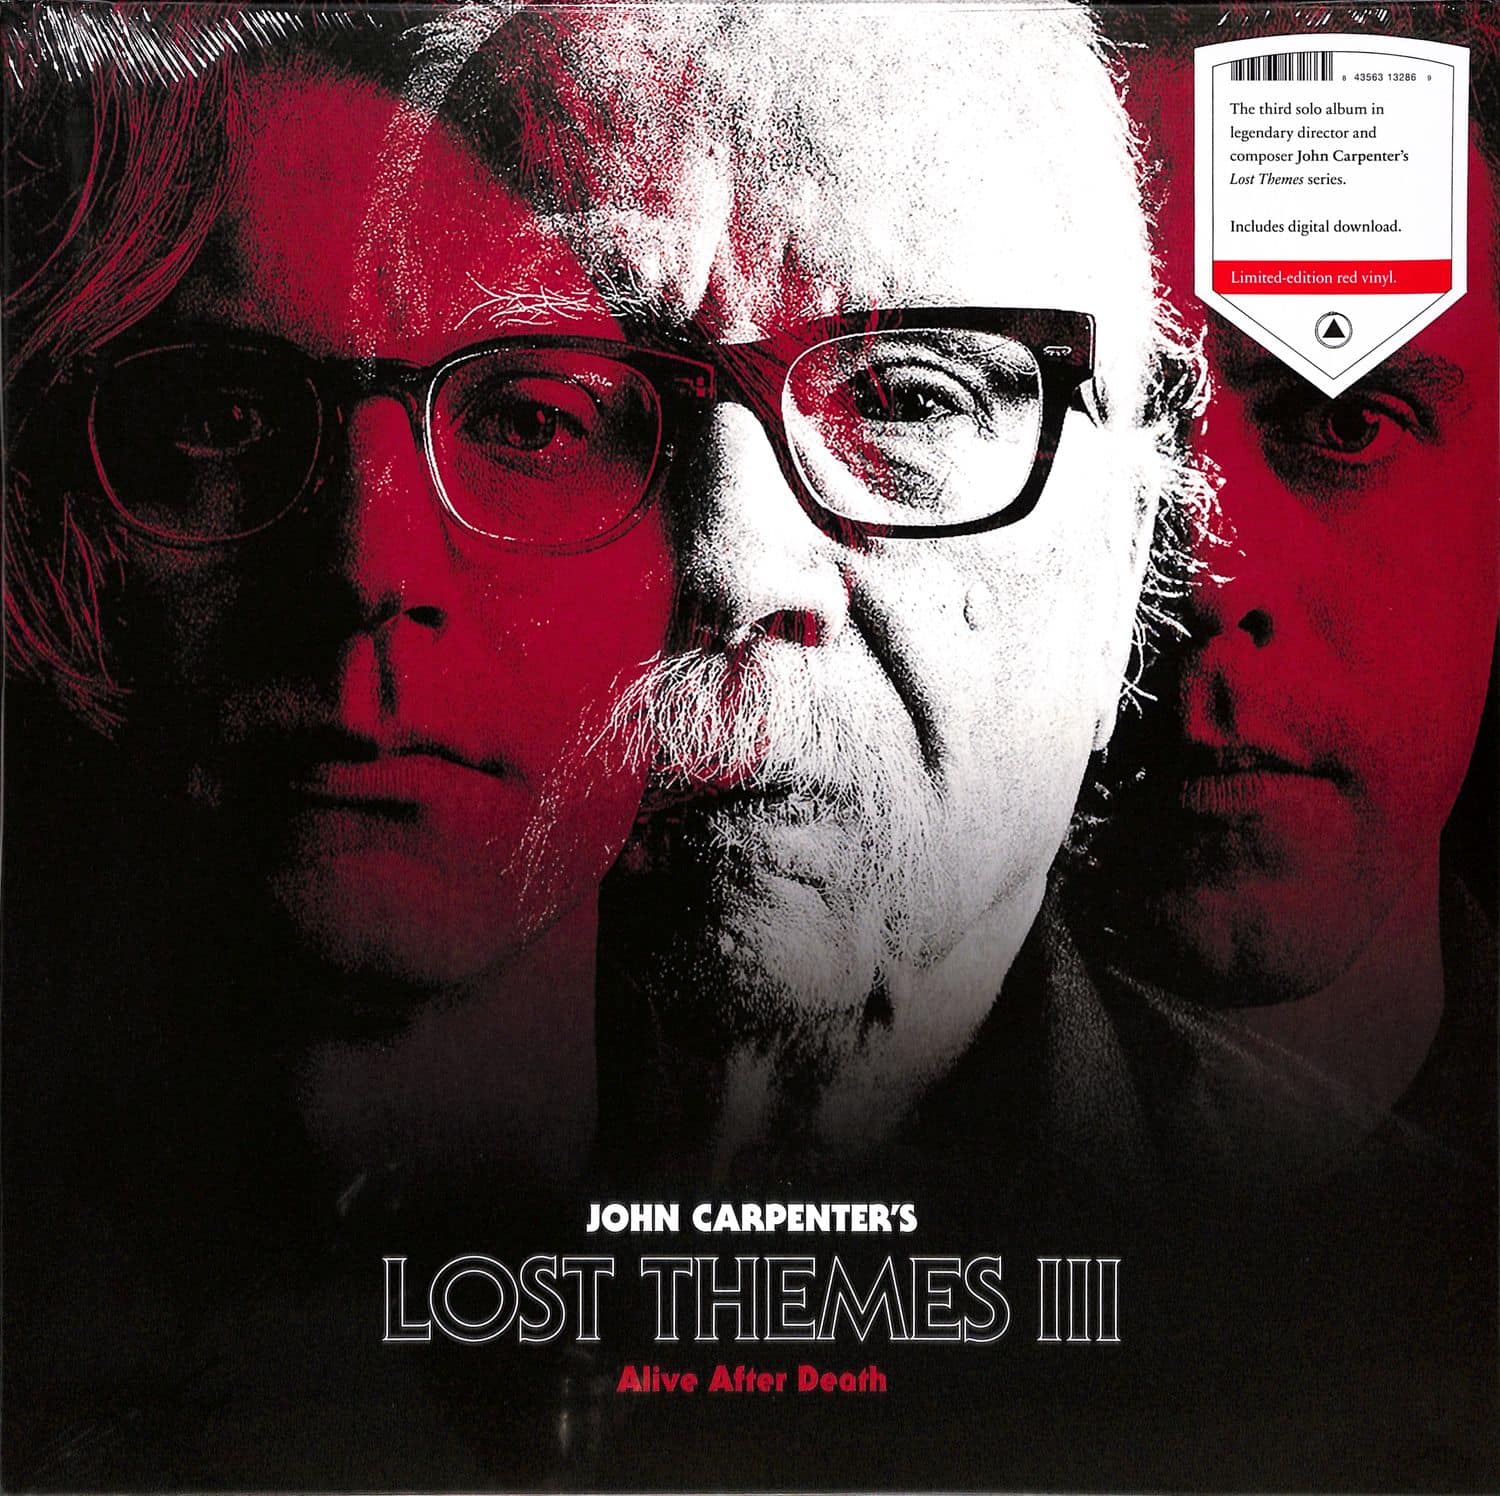 John Carpenter - LOST THEMES III - ALIVE AFTER DEATH 